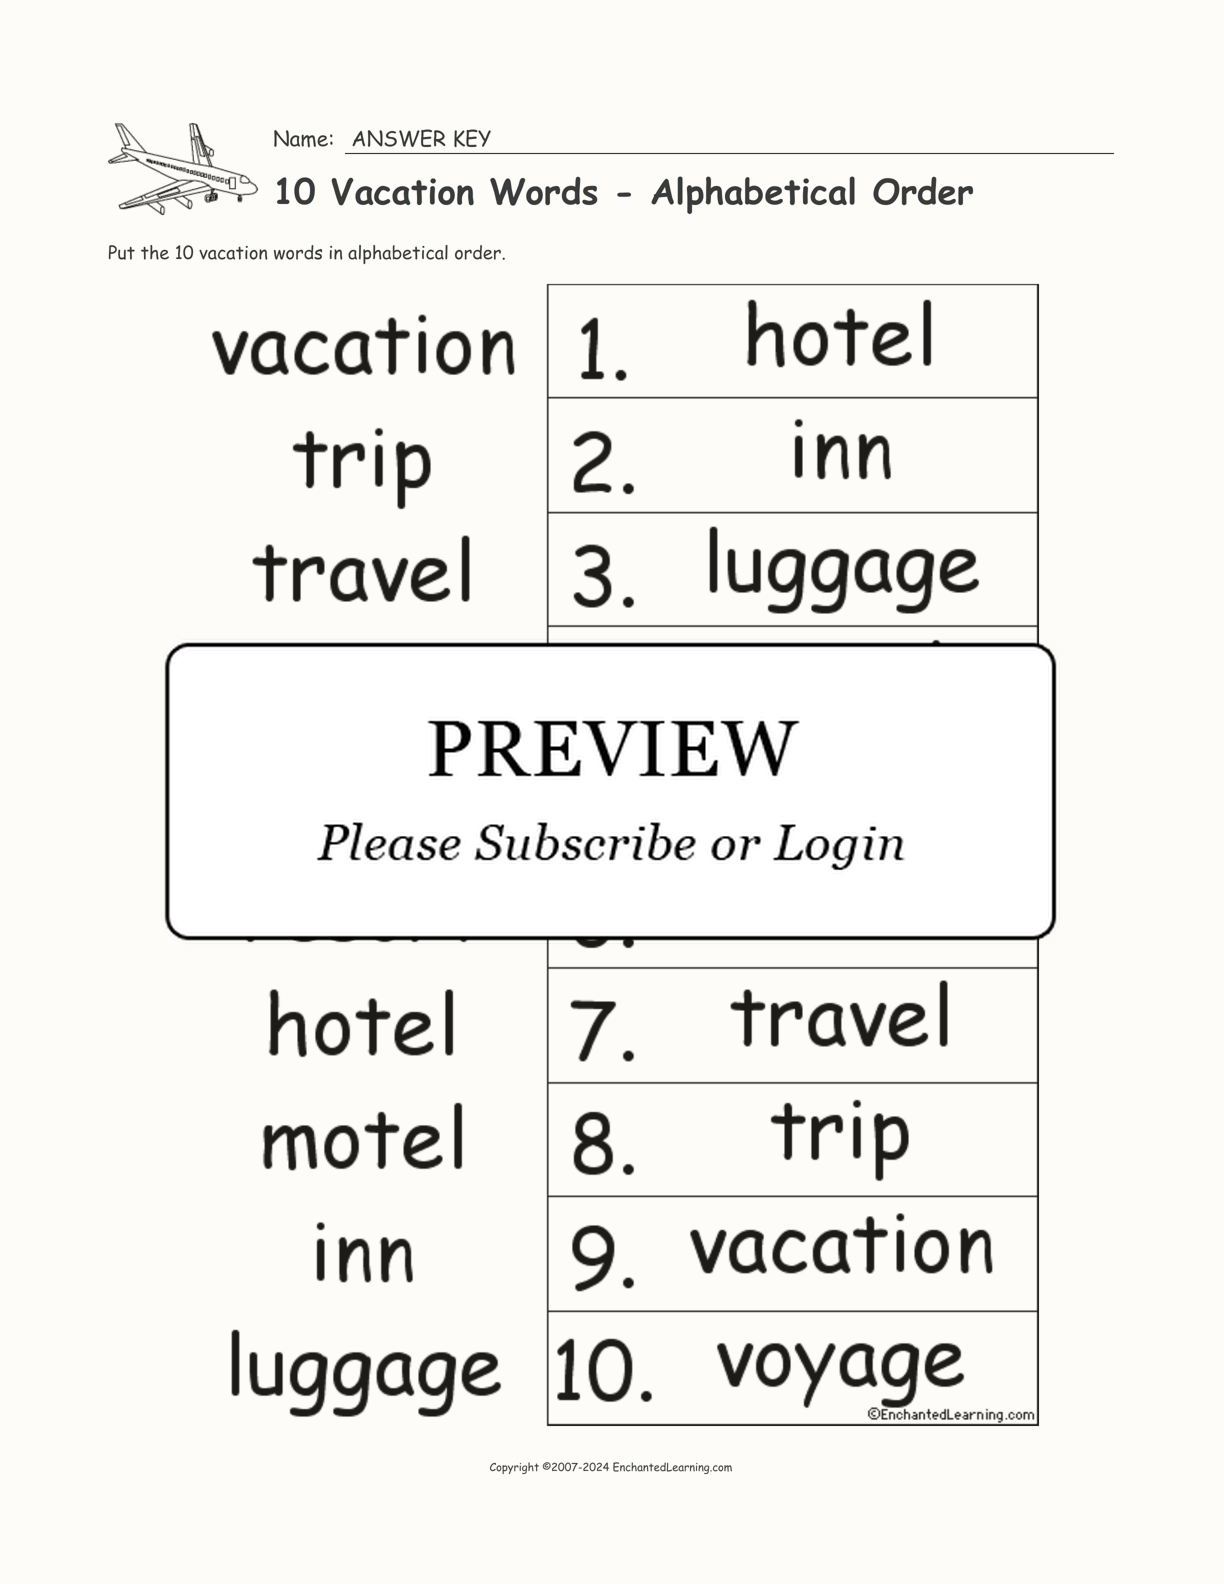 10 Vacation Words - Alphabetical Order interactive worksheet page 2